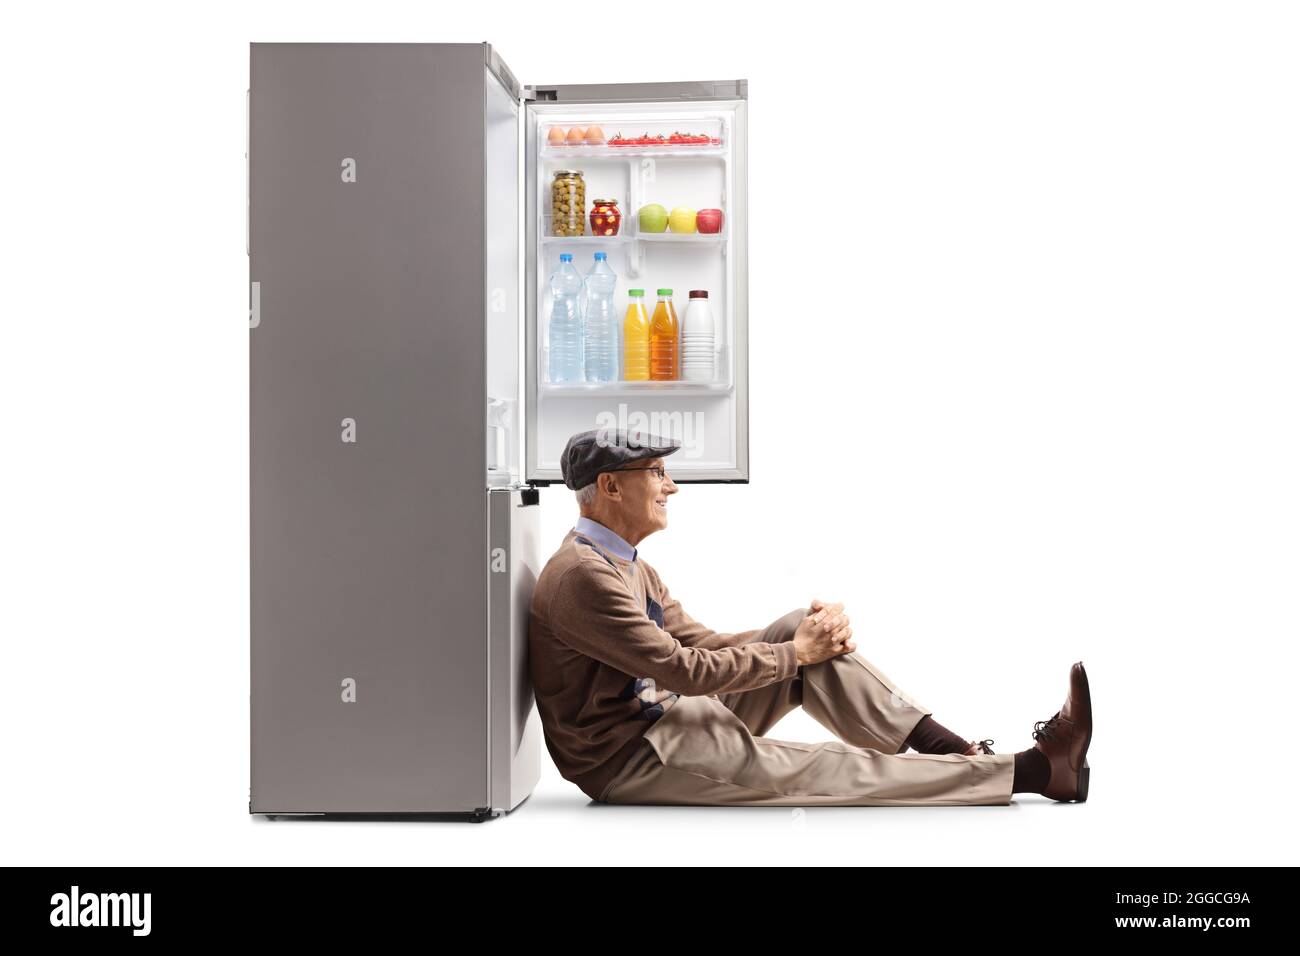 Elderly man sitting on the floor and leaning on a fridge isolated on white background Stock Photo